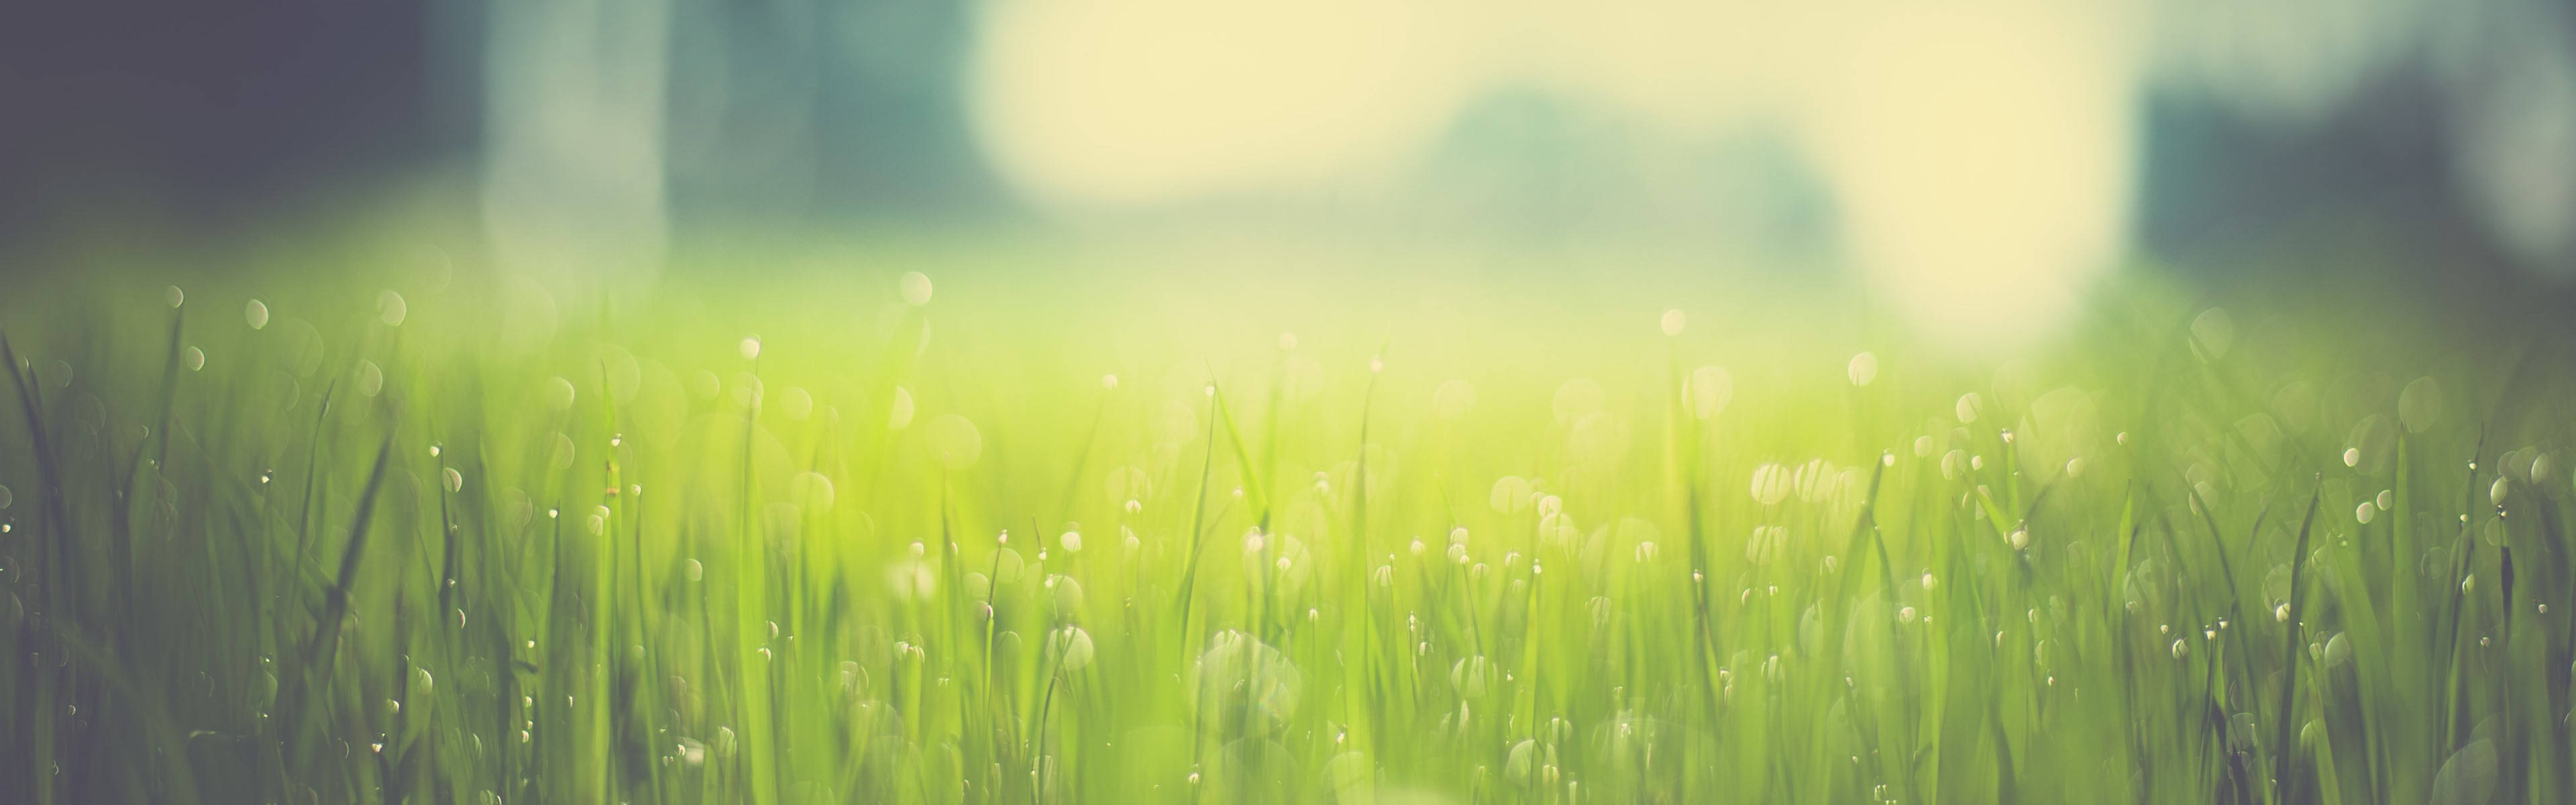 4K Dual Monitor Grass With Dew Drops Wallpaper